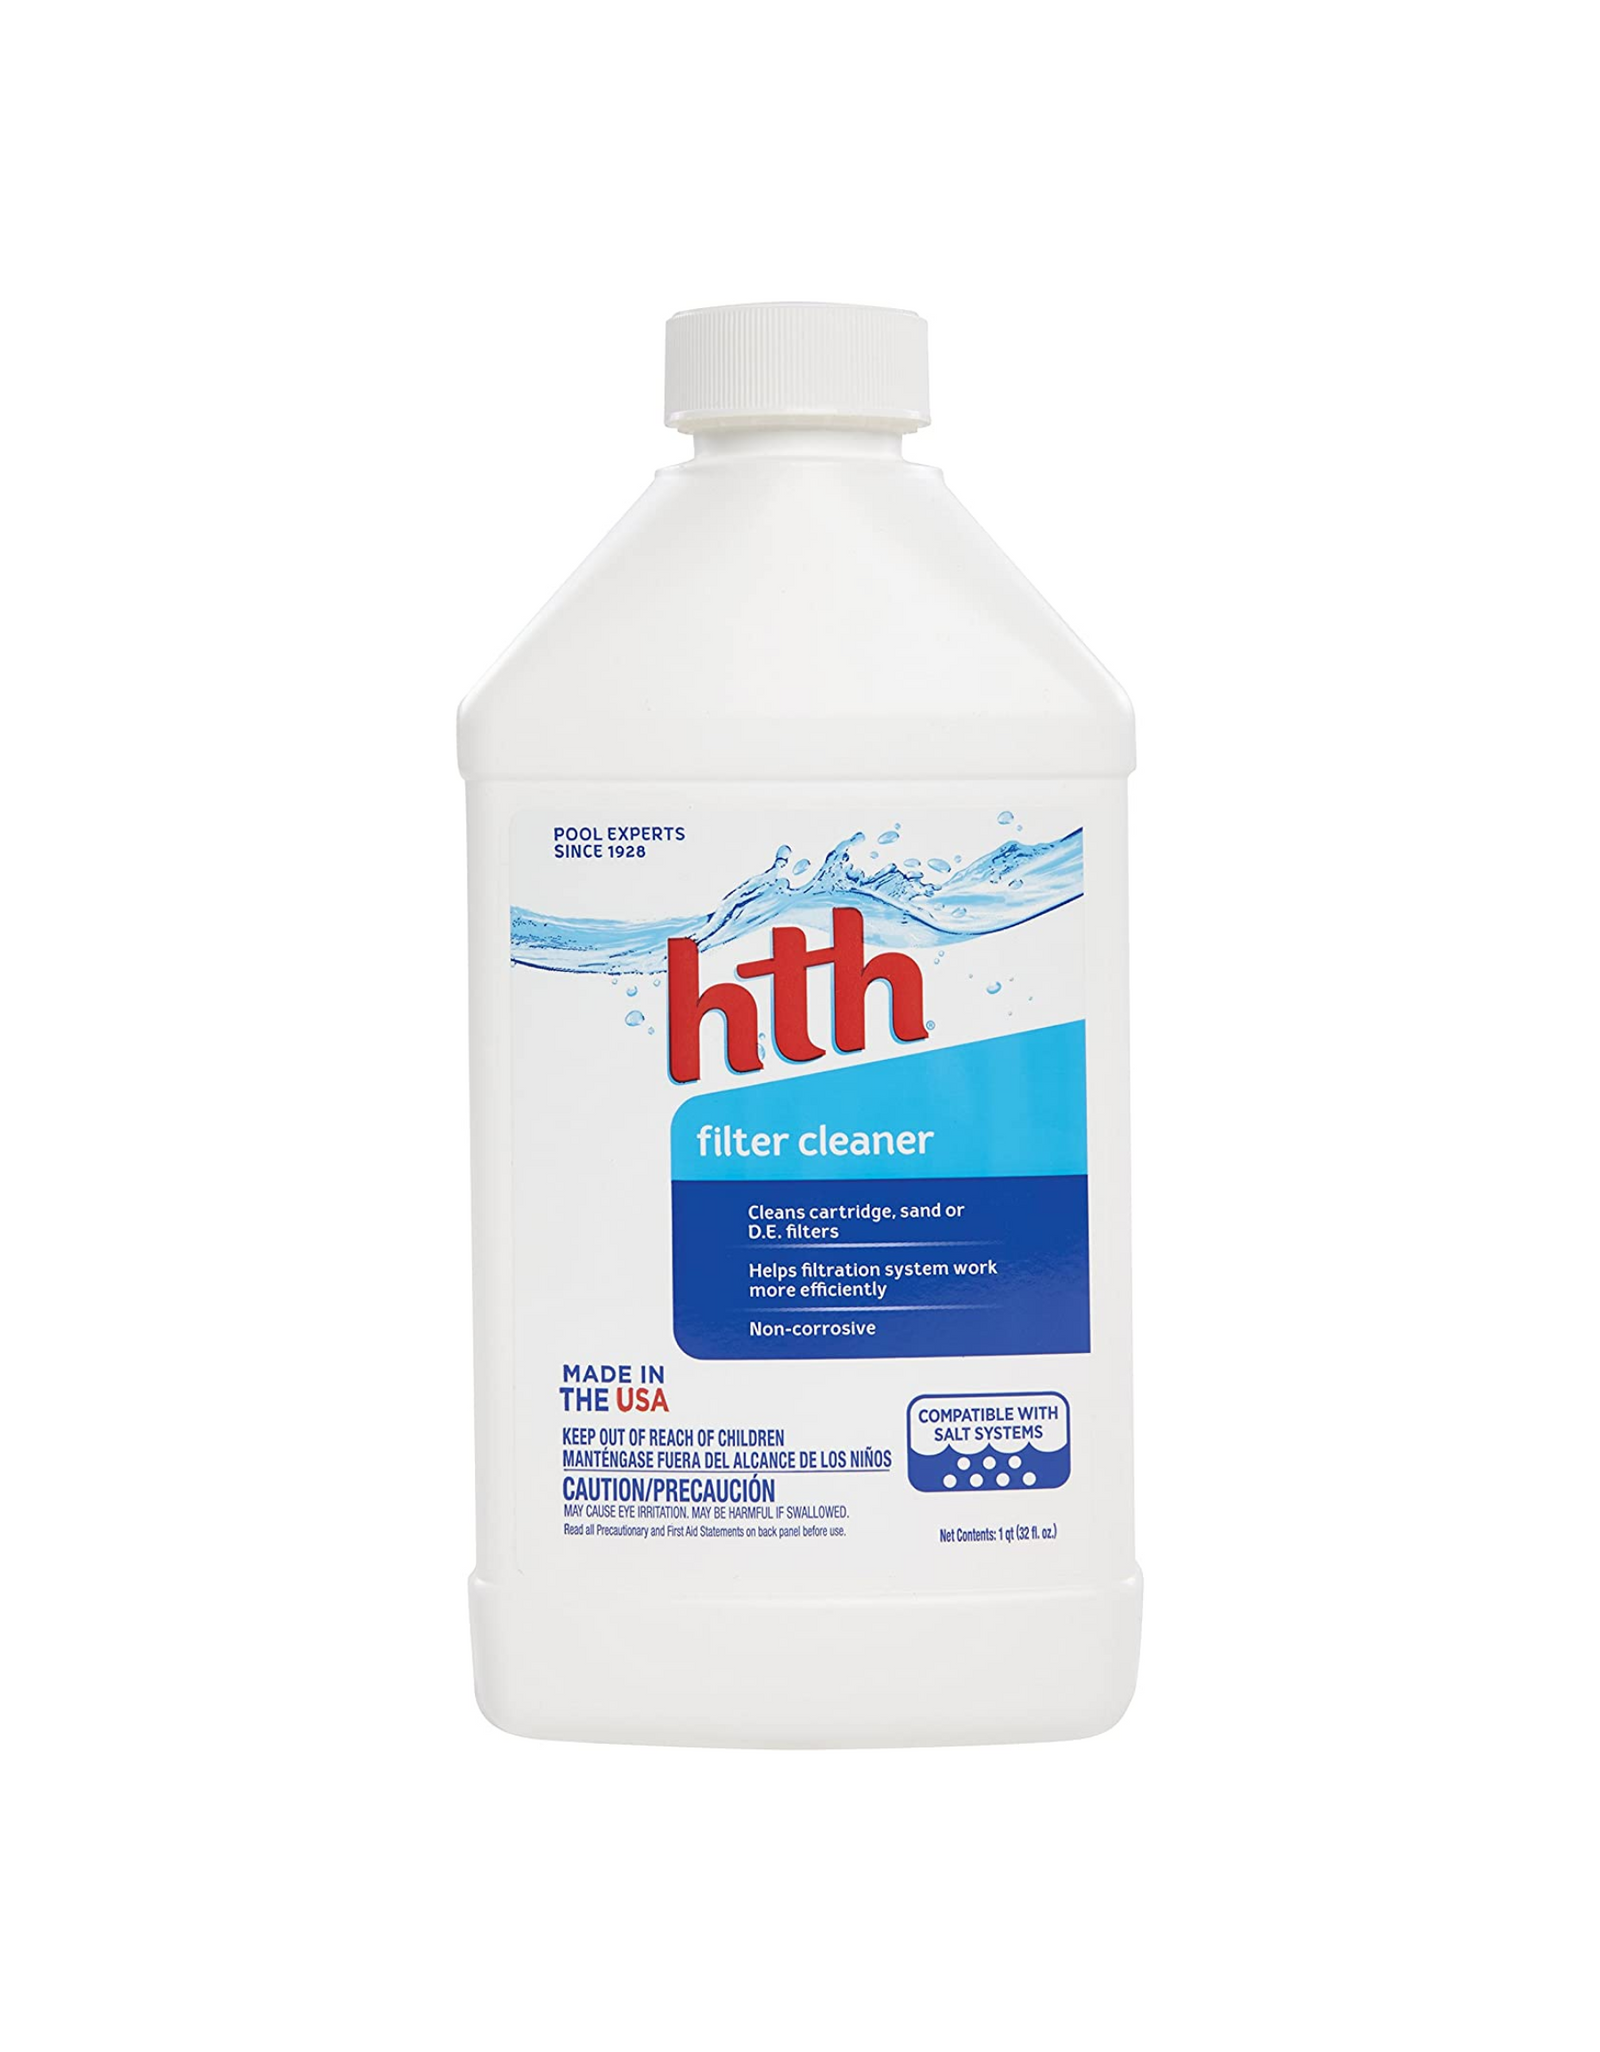 HTH 67015 Filter Cleaner Care for Swimming Pools, 1 Quart